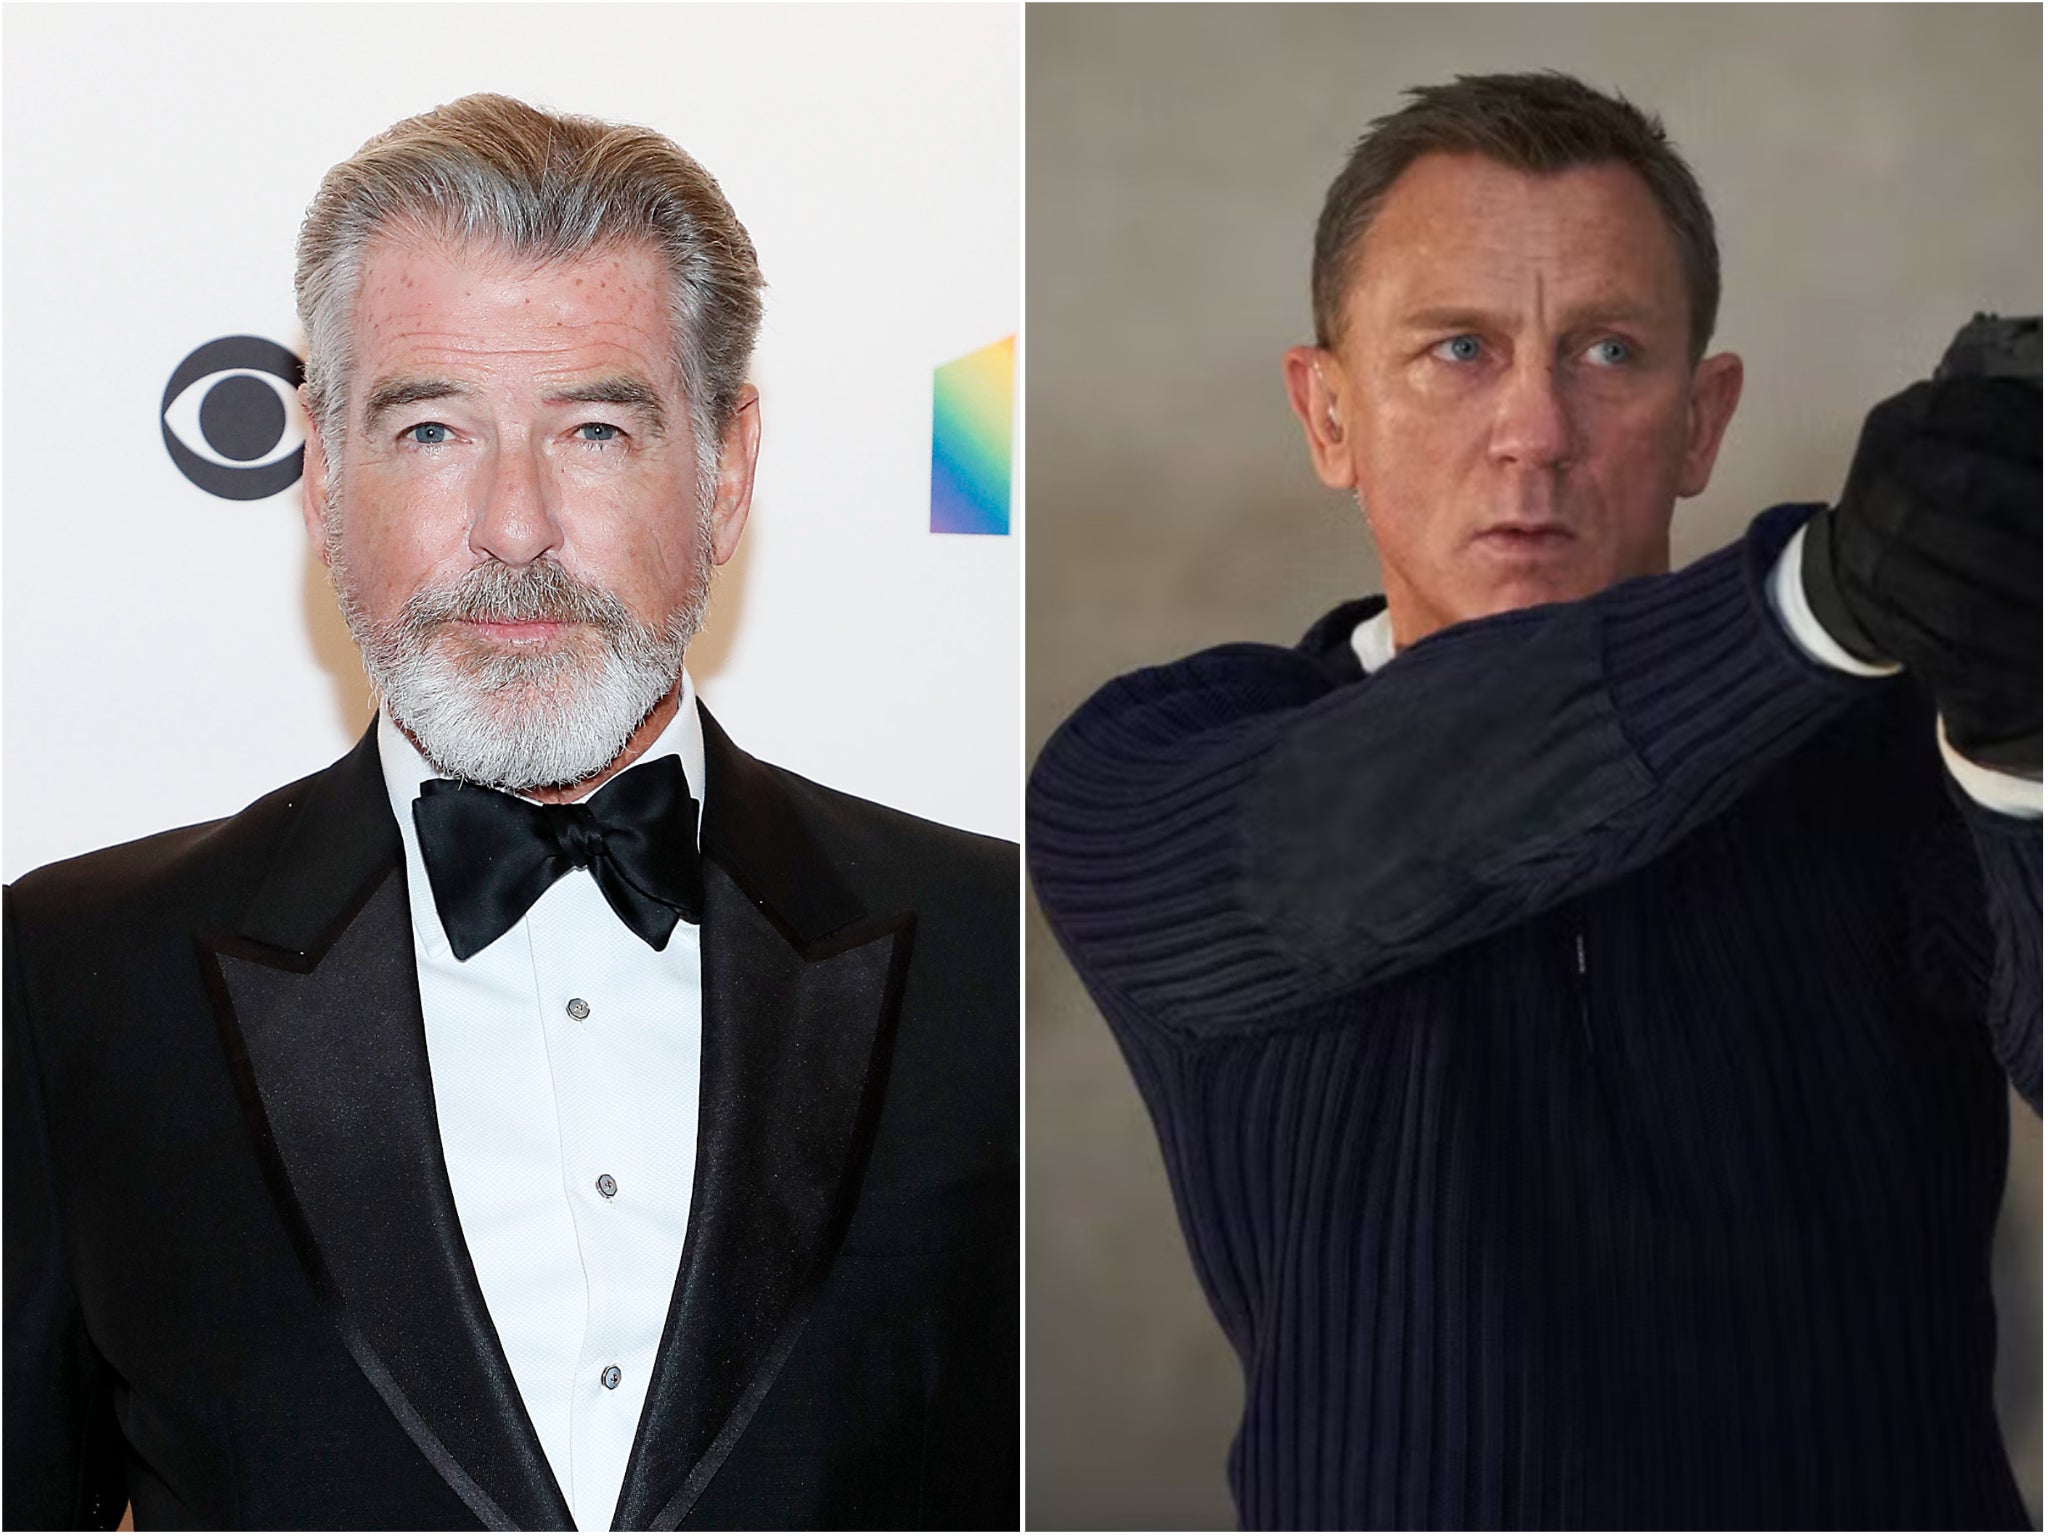 Pierce Brosnan throws shade at No Time to Die: ‘I’m not too sure about the last one’